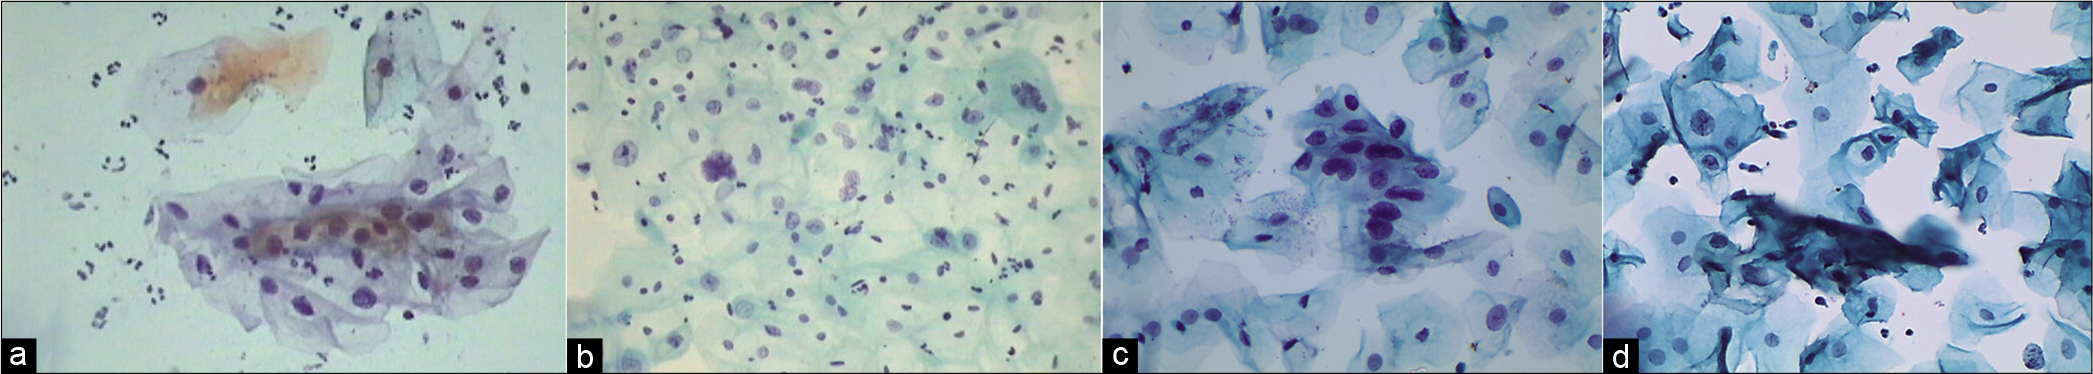 (a and b) CPS: Nuclear smudging and multinucleation, respectively (×40). (c and d) LBC: Nuclear hyperchromasia and chromatin clumping, respectively (×40).